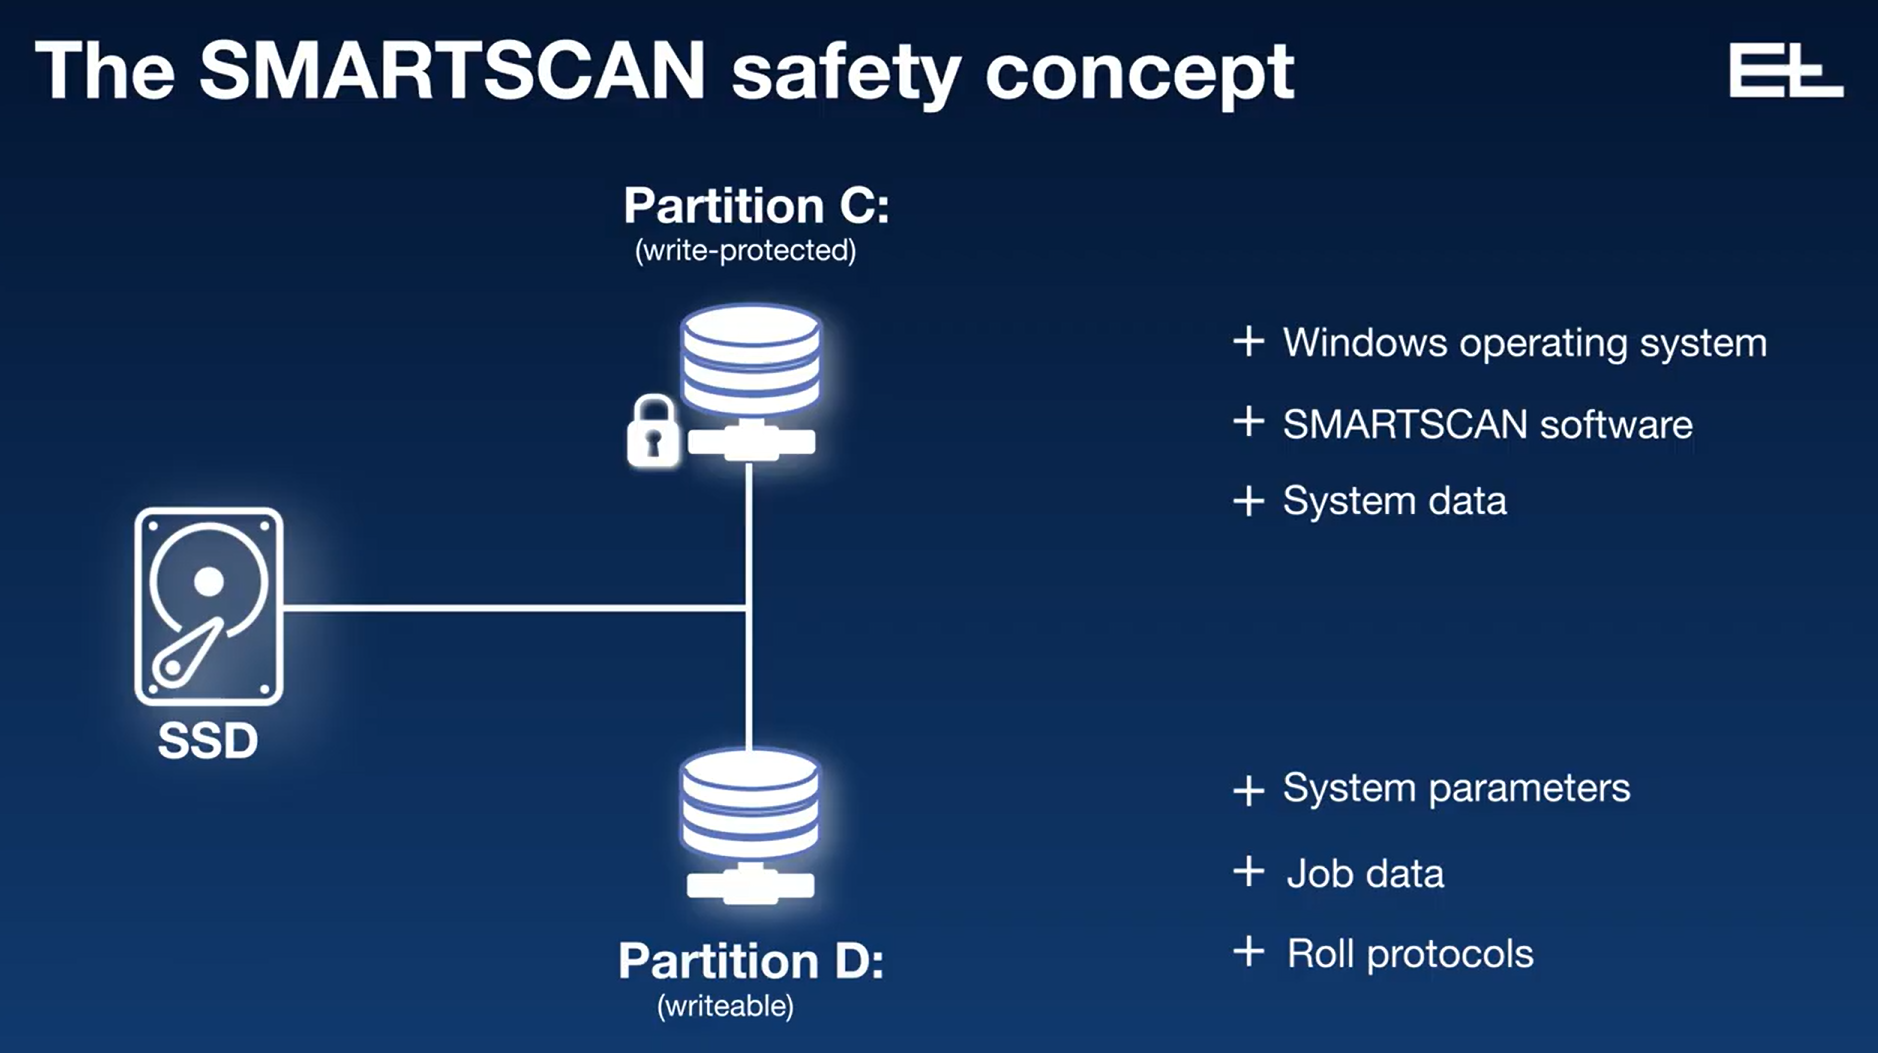 Microscan launches inspection system for Printronix TT printers